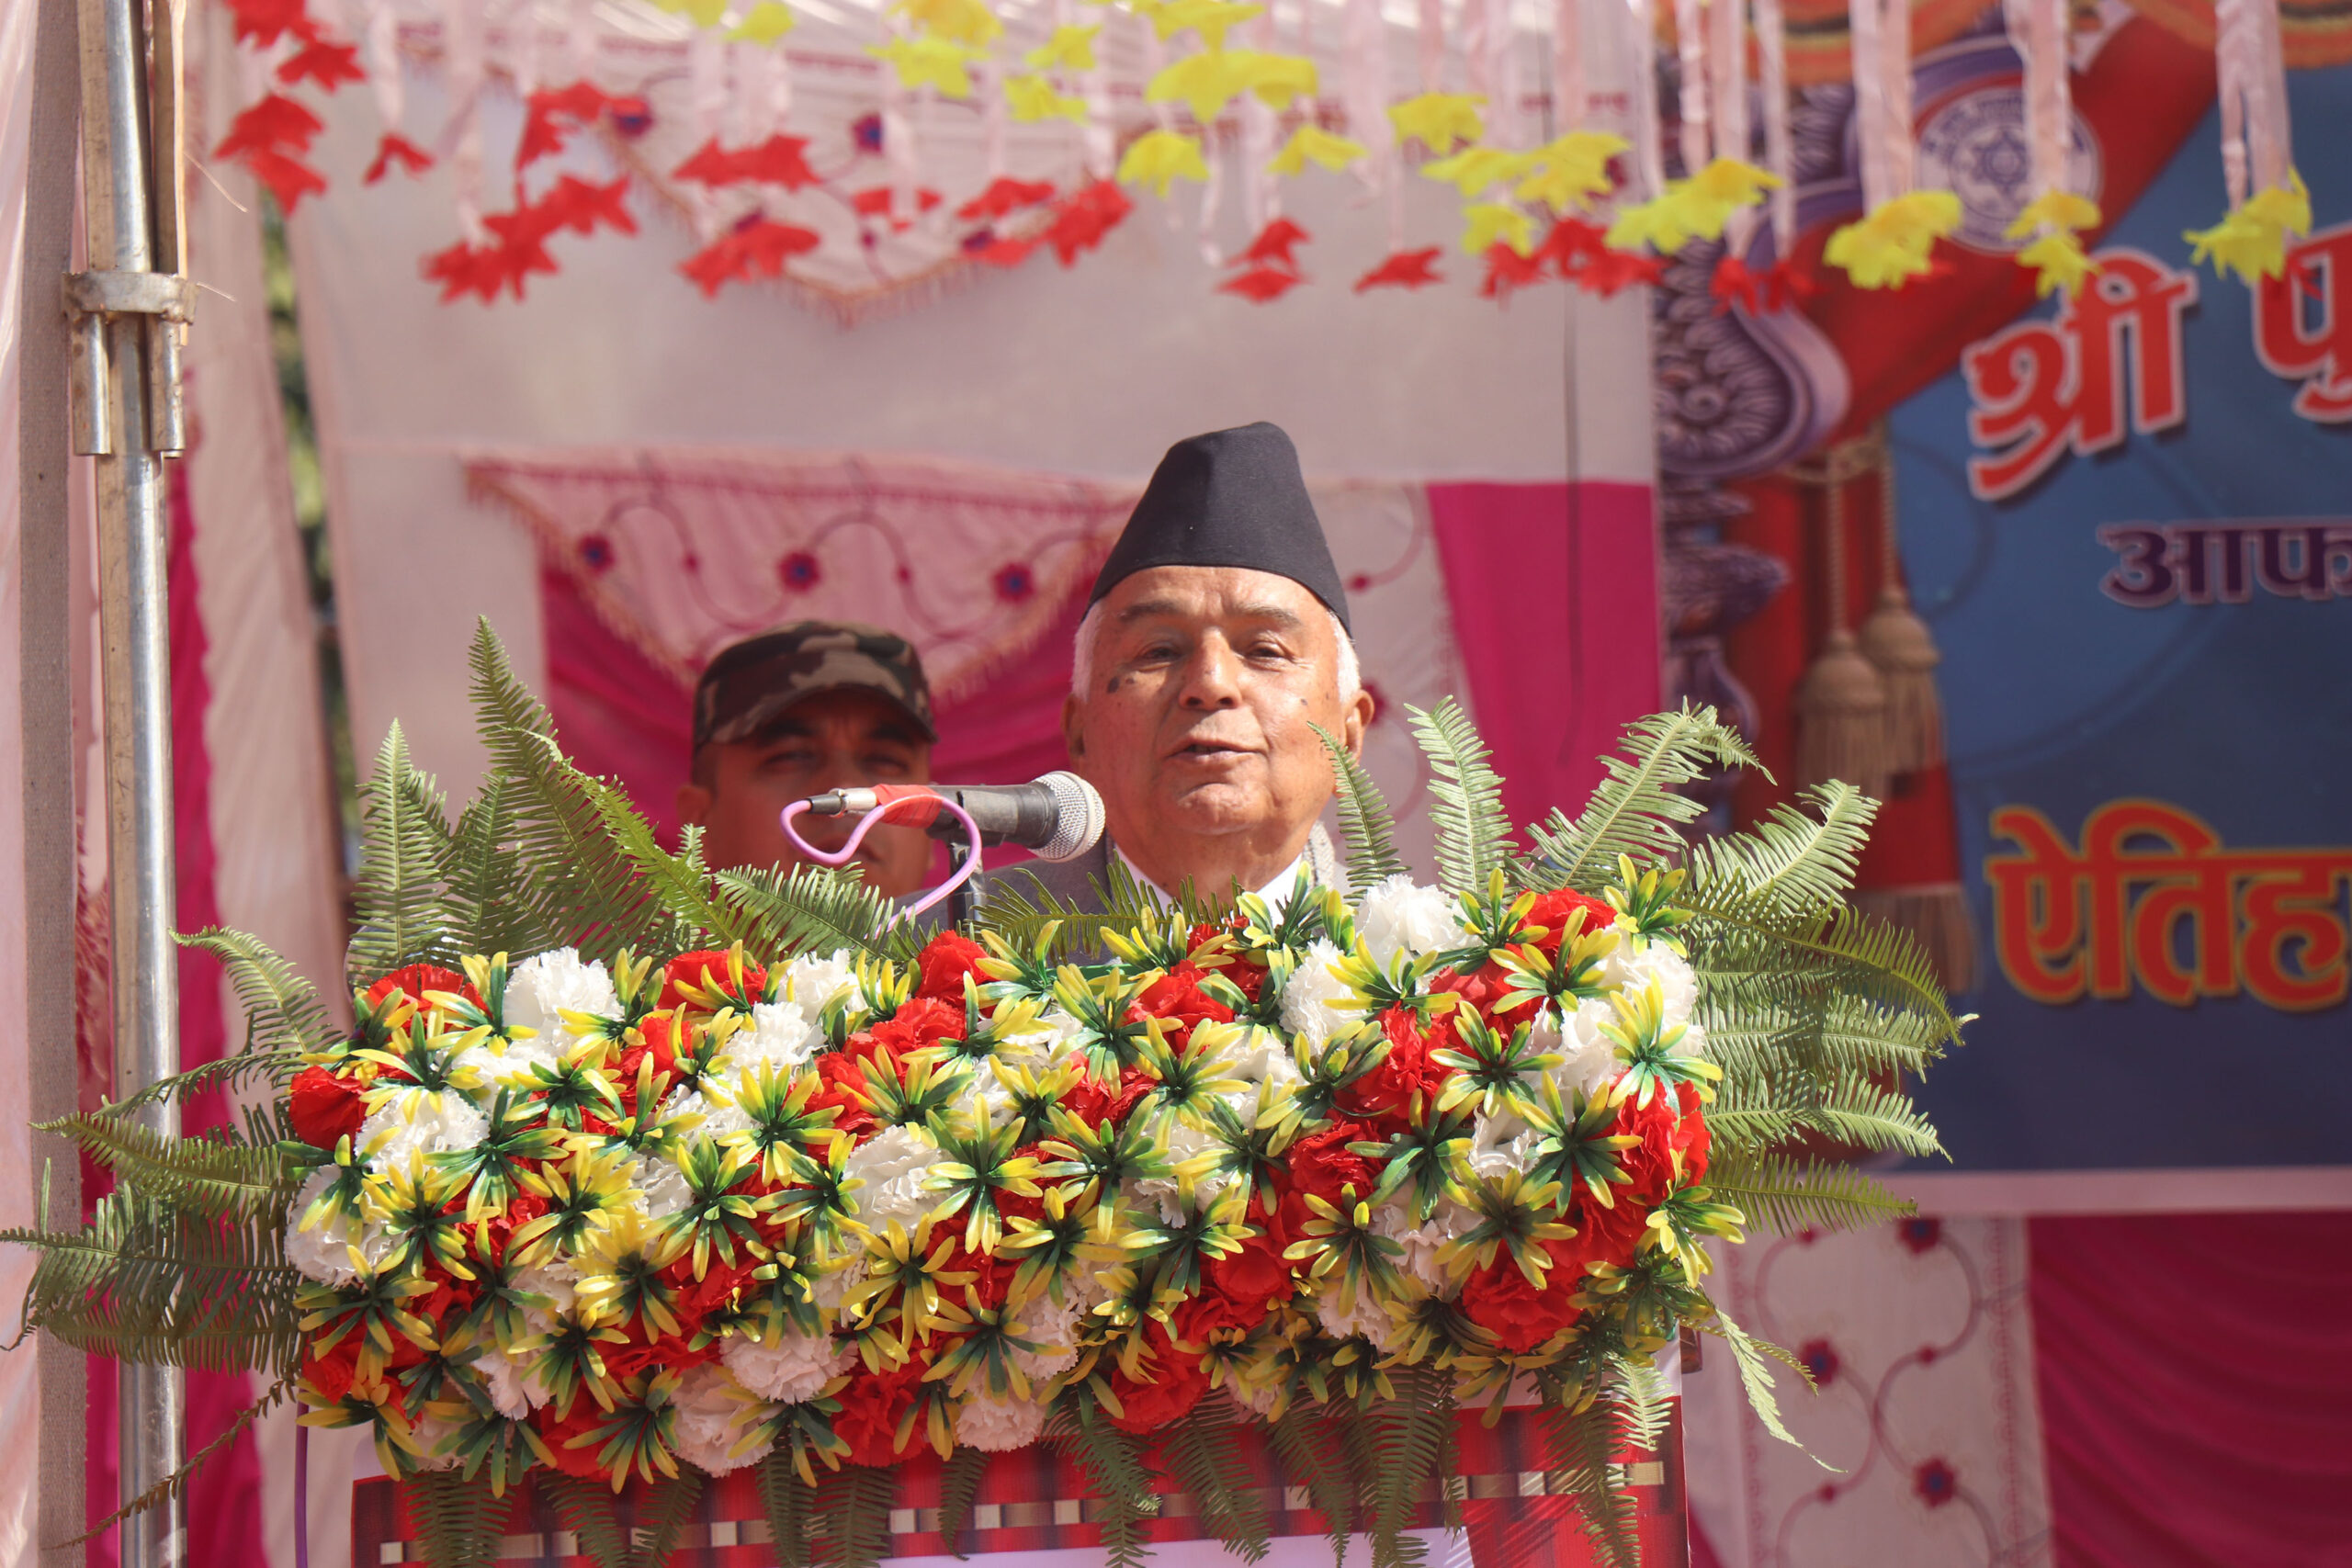 President Paudel raises alarm over rural depopulation due to lack of employment opportunities